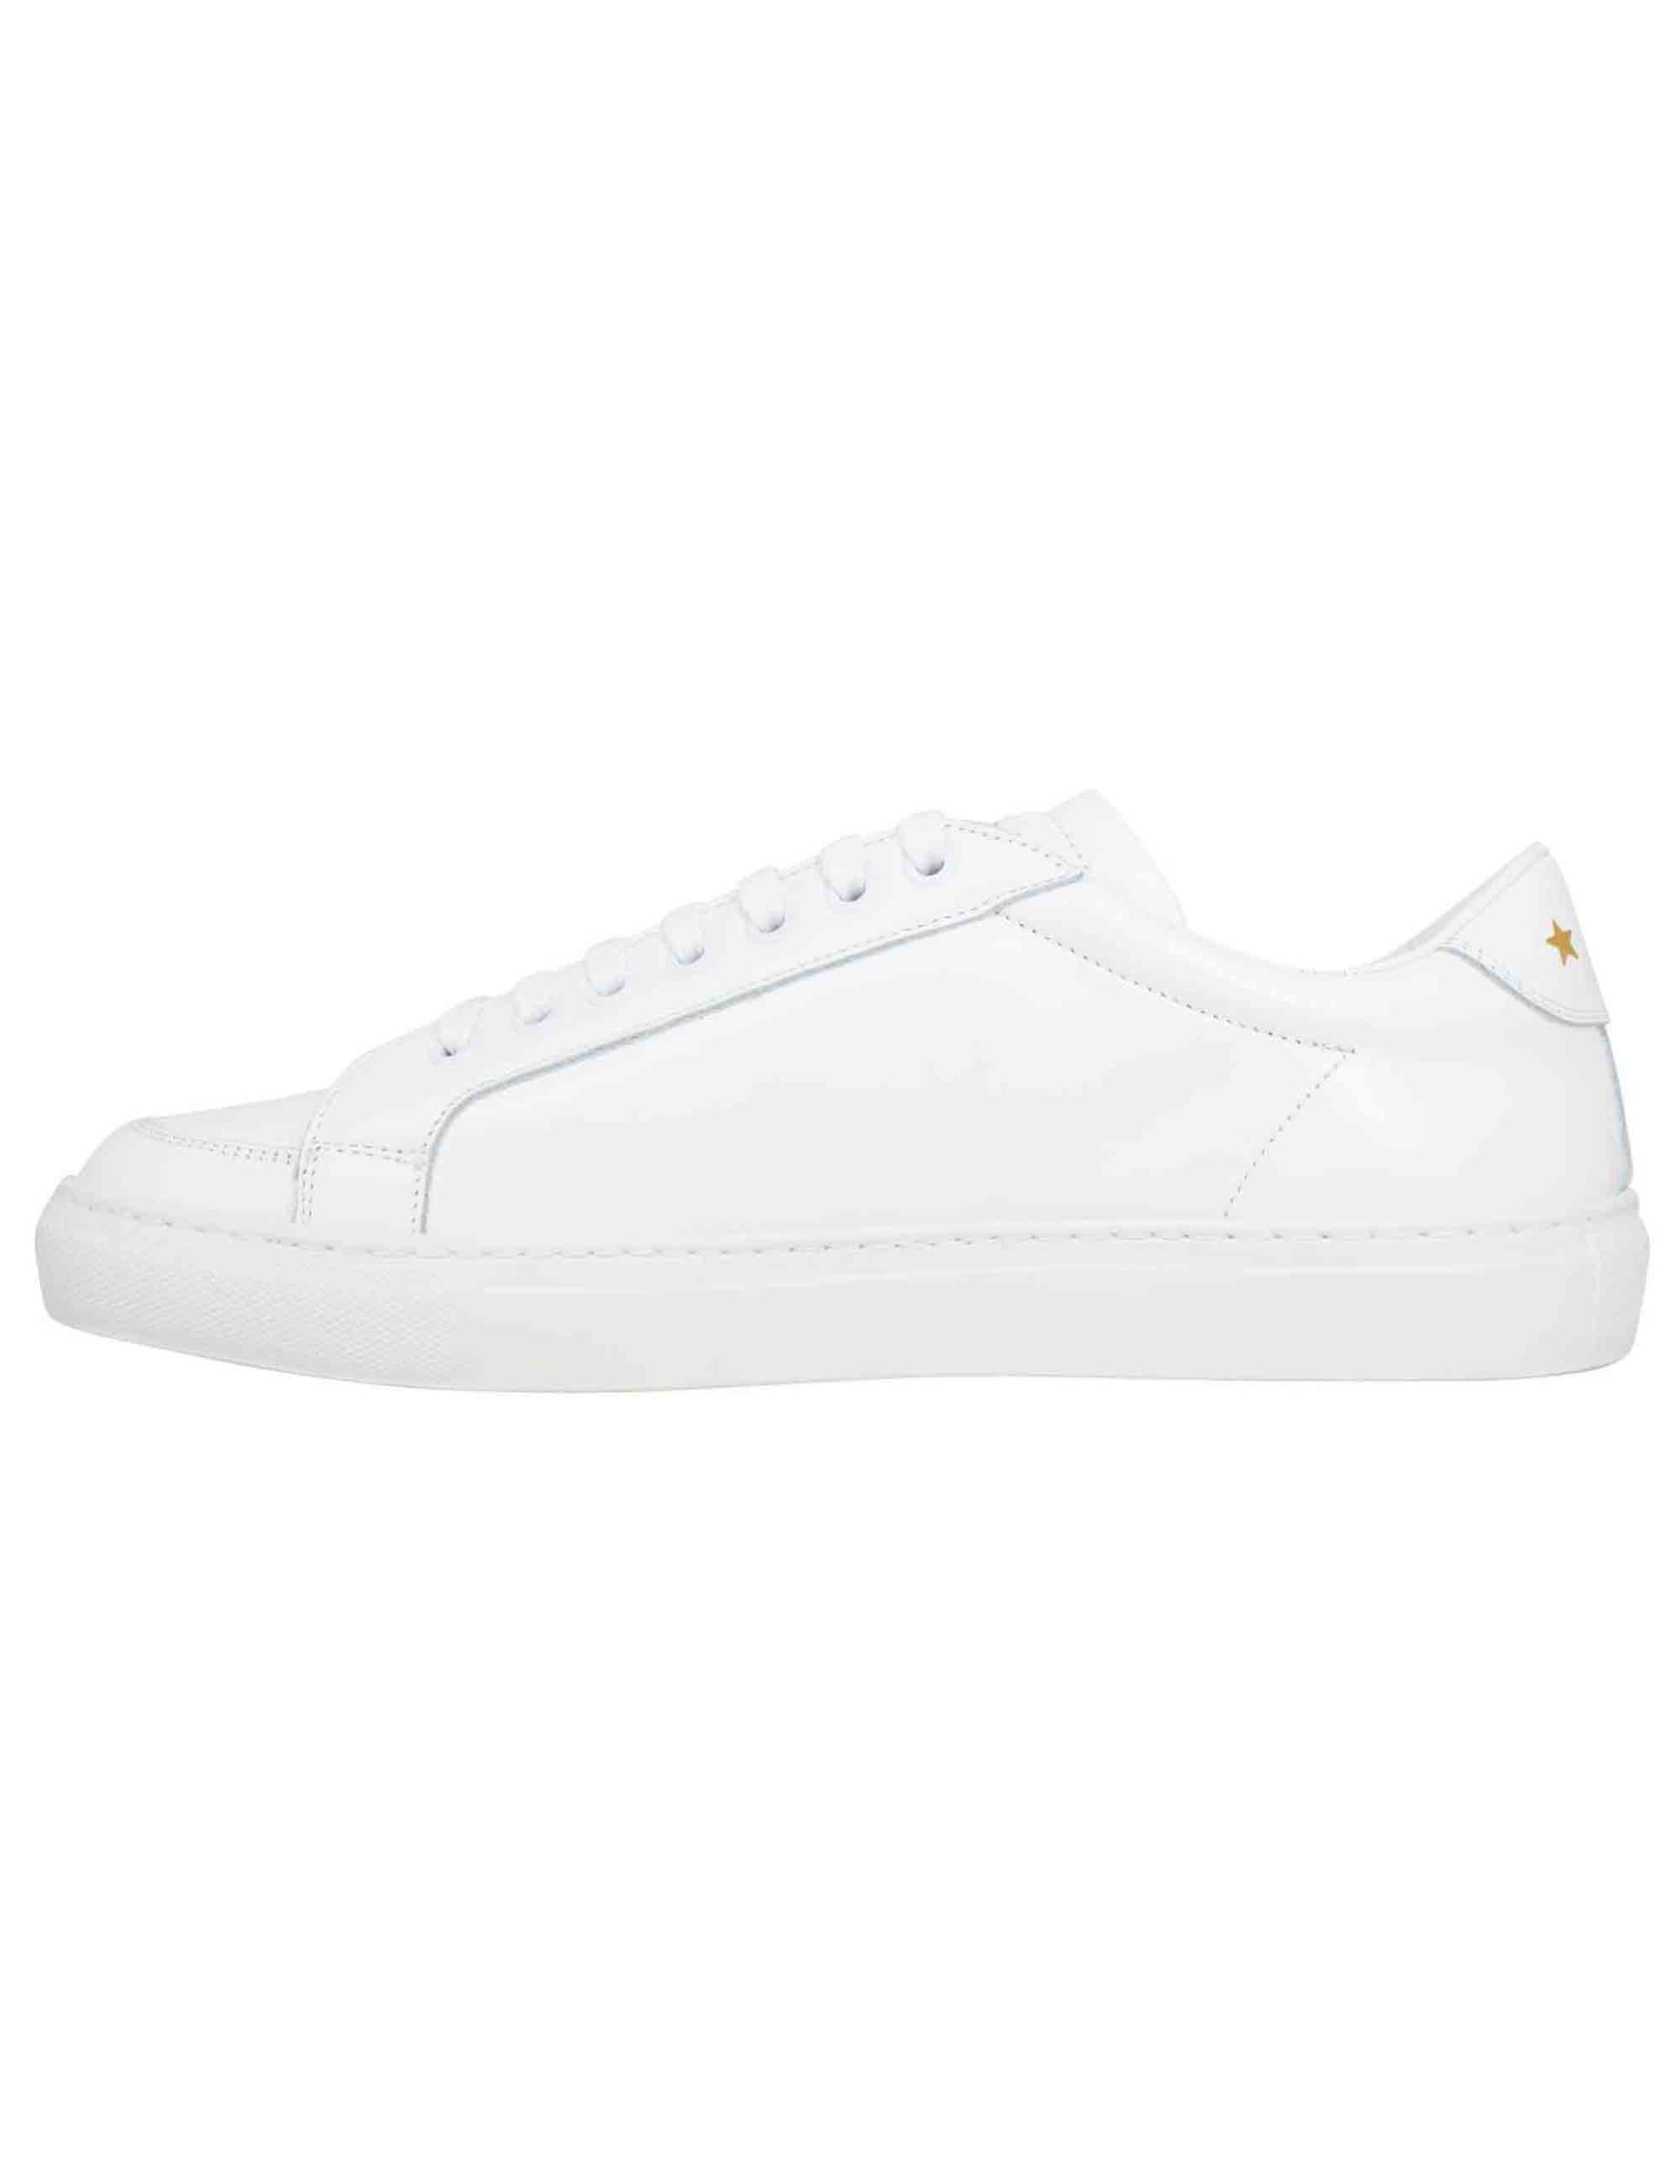 Top spin men's sneakers in white leather